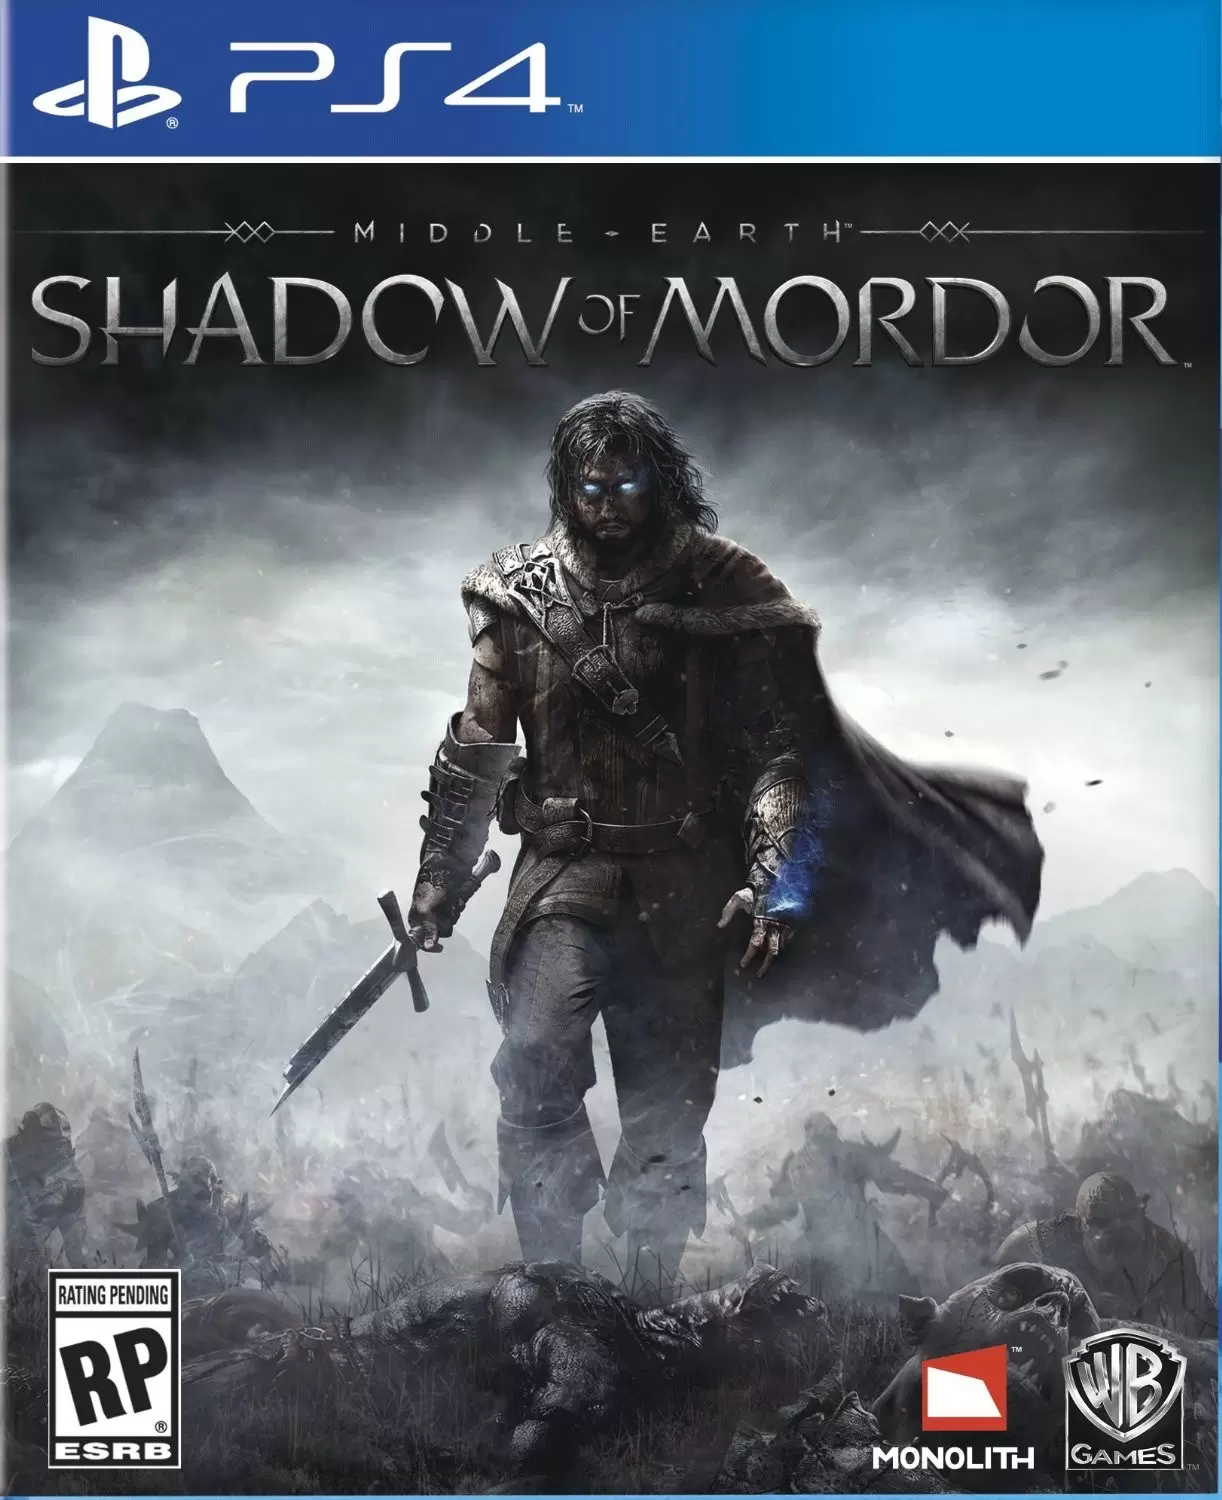 PS4 Games - Middle-Earth: Shadow of Mordor